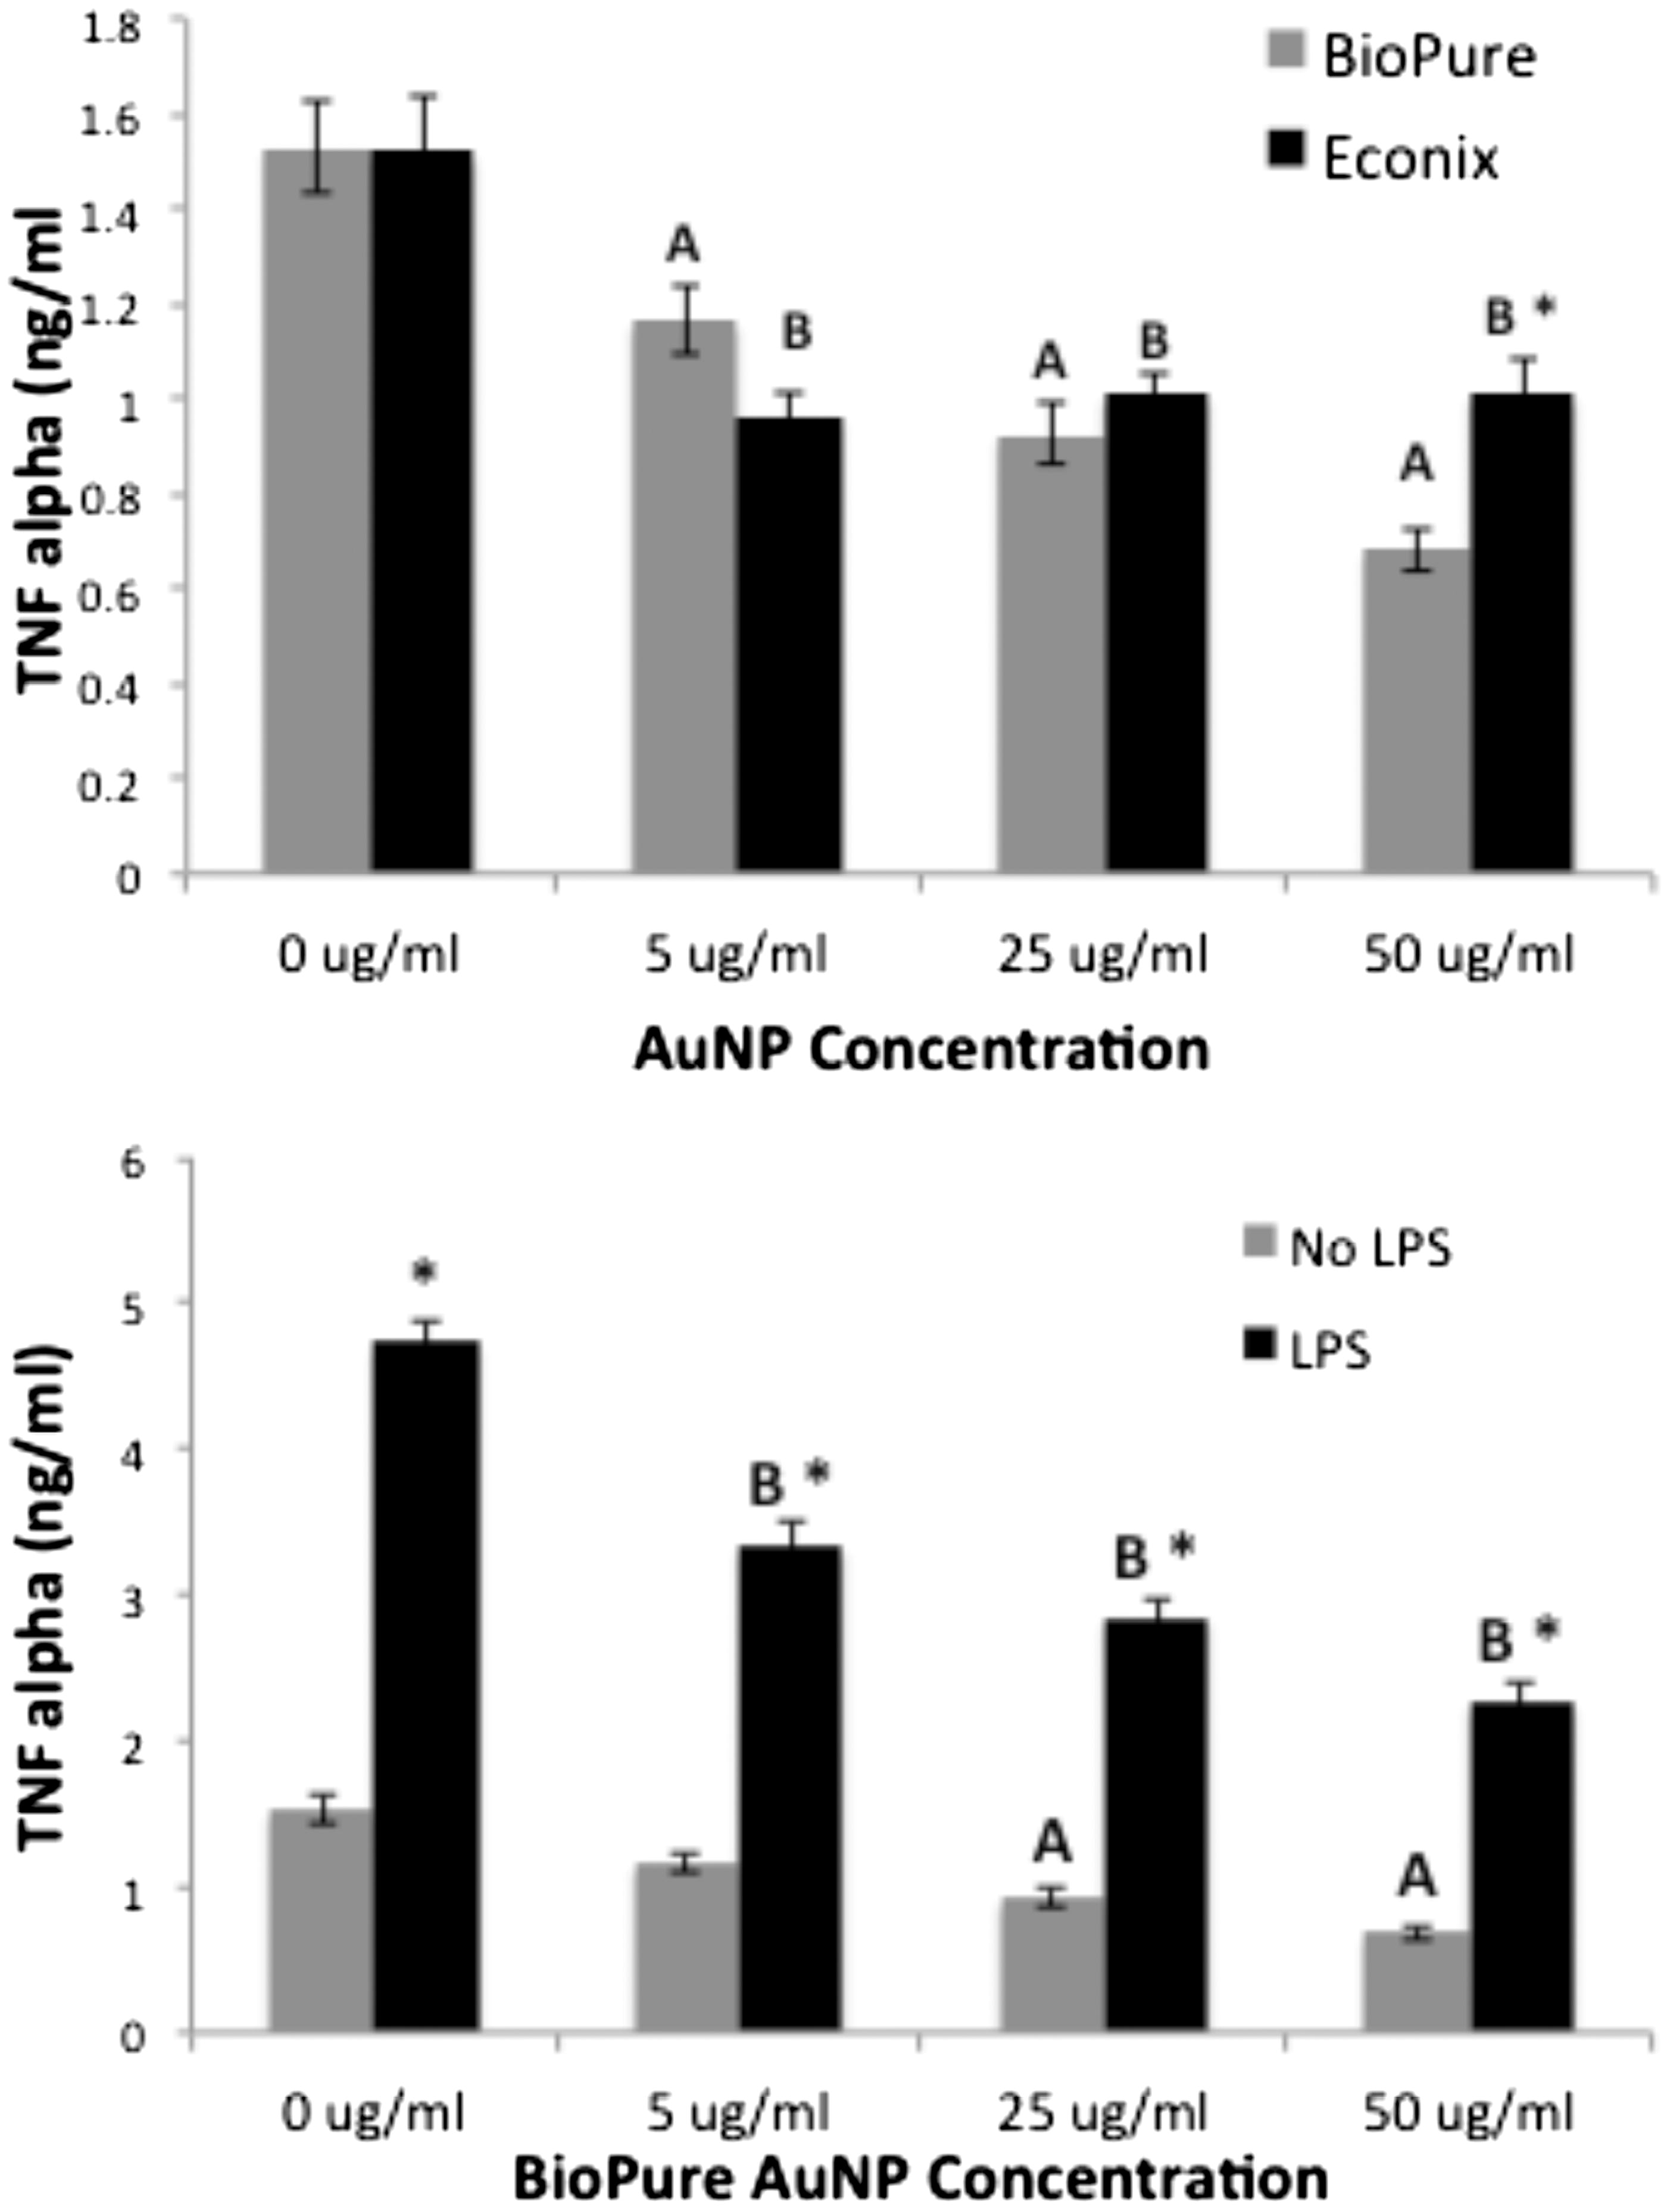 Figure 6. Both BioPure and Econix AuNP reduced TNF levels compared to control. Culture media from RAW cells treated for 48 h with AuNP and assayed for TNFα. Top: BioPure AuNP reduced TNFα in dose-dependent manner (p < 0.05, ANOVA); (a) significantly different from “no treatment” control in BioPure series. Econix AuNP reduced TNFα at all levels (b = change from control in Econix series), but there was no difference between effects from concentrations of 5, 25 and 50 µg/ml. TNFα level was higher for Econix than BioPure at 50 µg/ml (*p < 0.05, t-test). n = 4. Bottom: LPS increased TNFα at all concentrations of AuNP including control, *p < 0.01 compared to no LPS at that concentration. BioPure AuNP reduced the LPS-induced TNFα levels in a dose-dependent manner (B = p < 0.01).